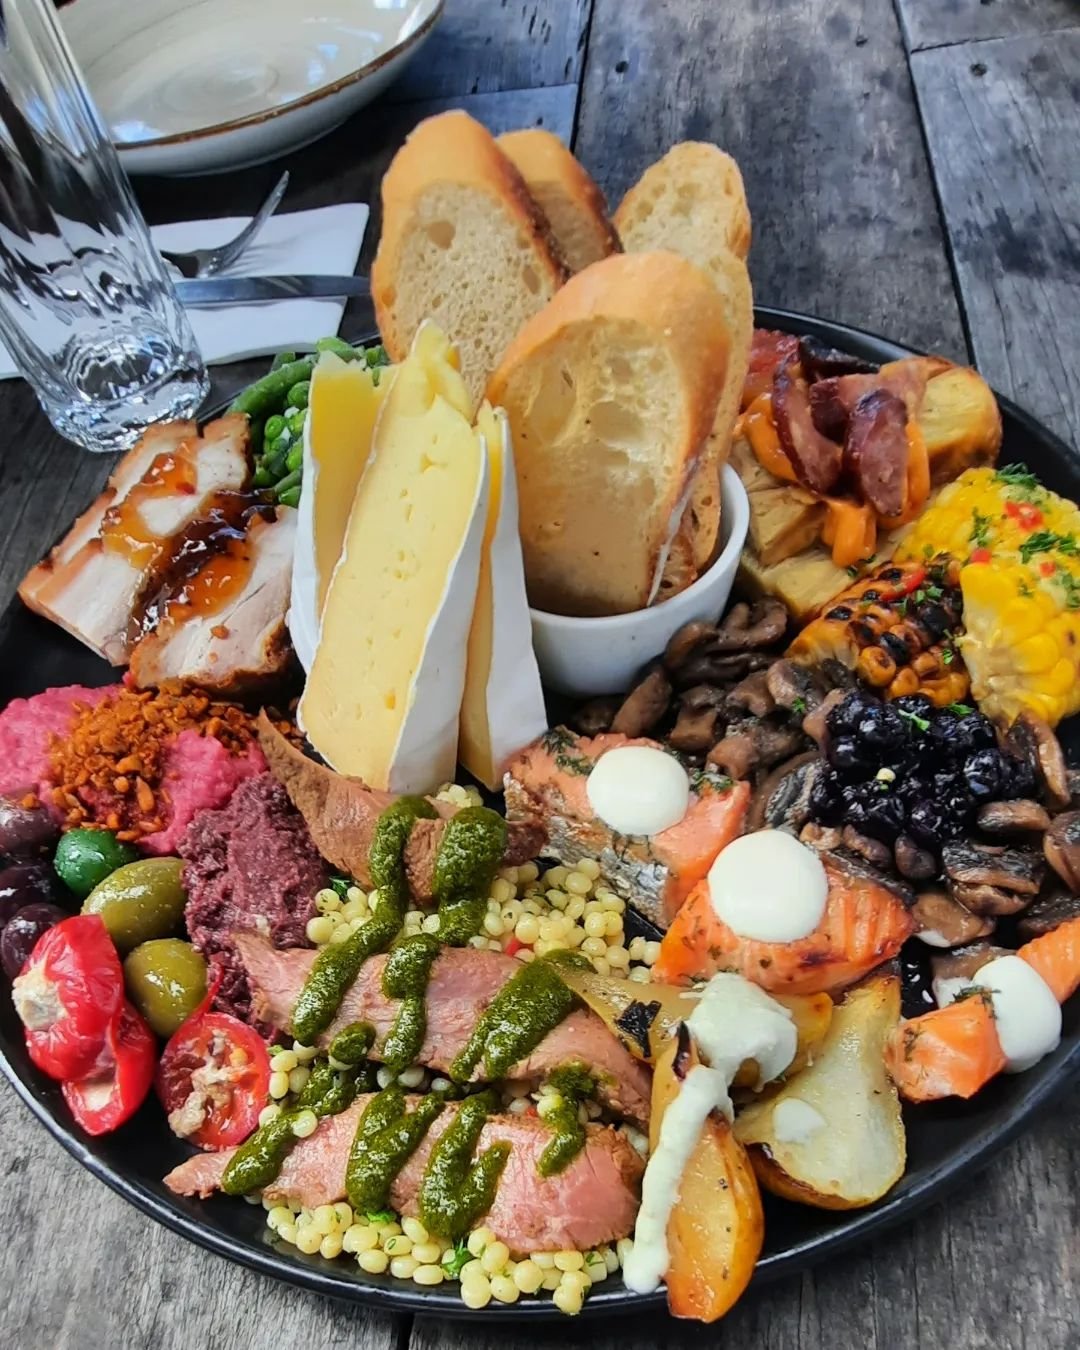 The shared vineyard platter for lunch on our Wine and Wild Coast Tour is still awesome in case anyone was wondering!